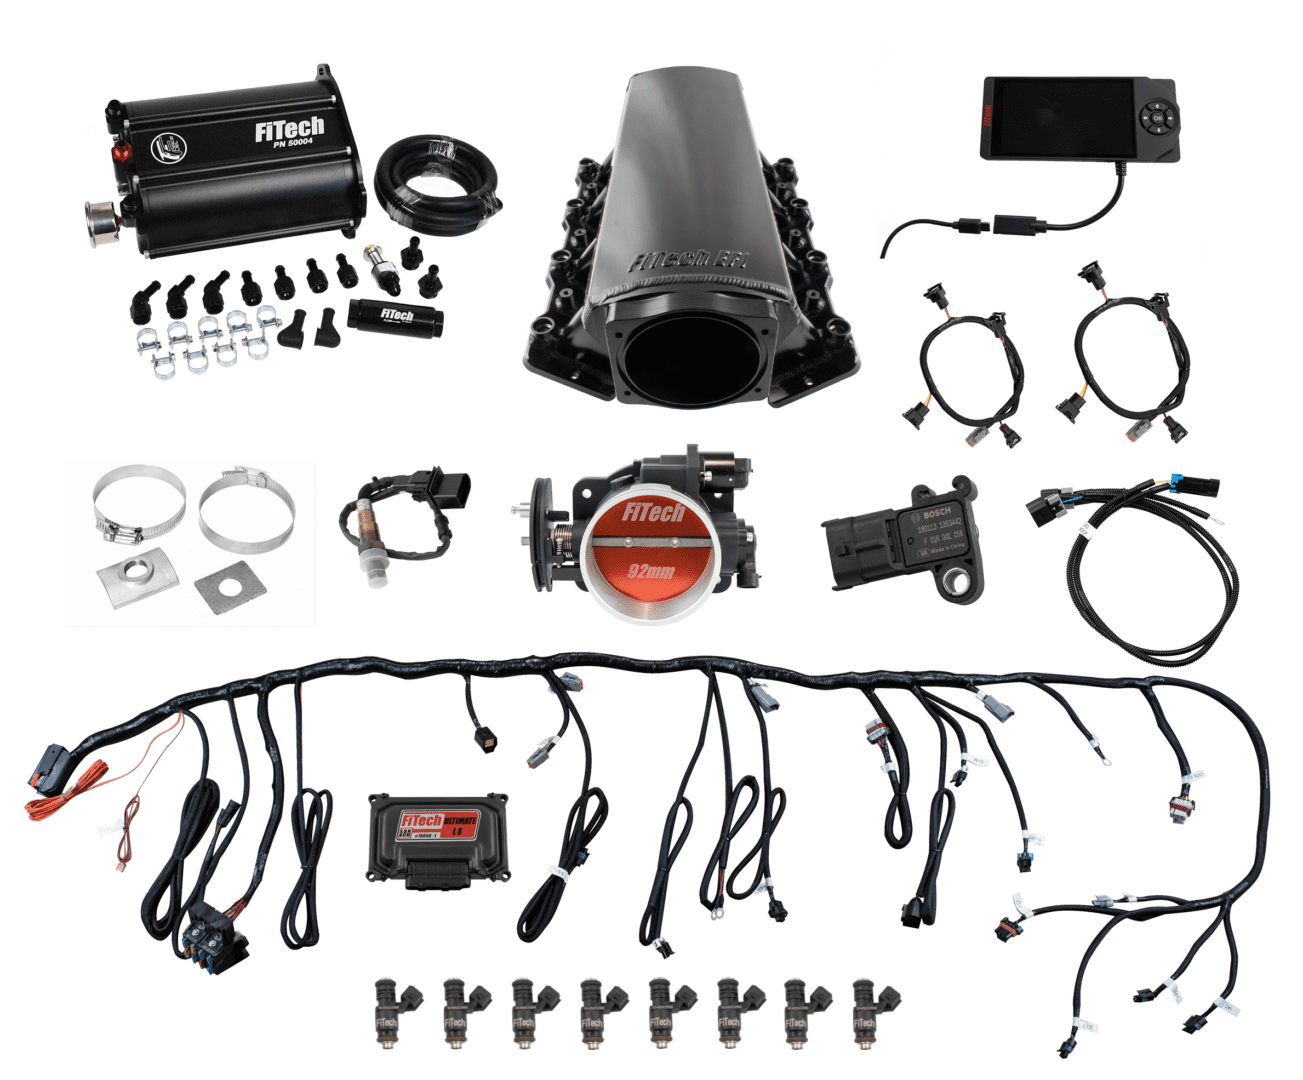 FiTech 75201 Fuel Delivery System, Ultimate LS Master Kit w/ 70001 Kit Plus Force Fuel